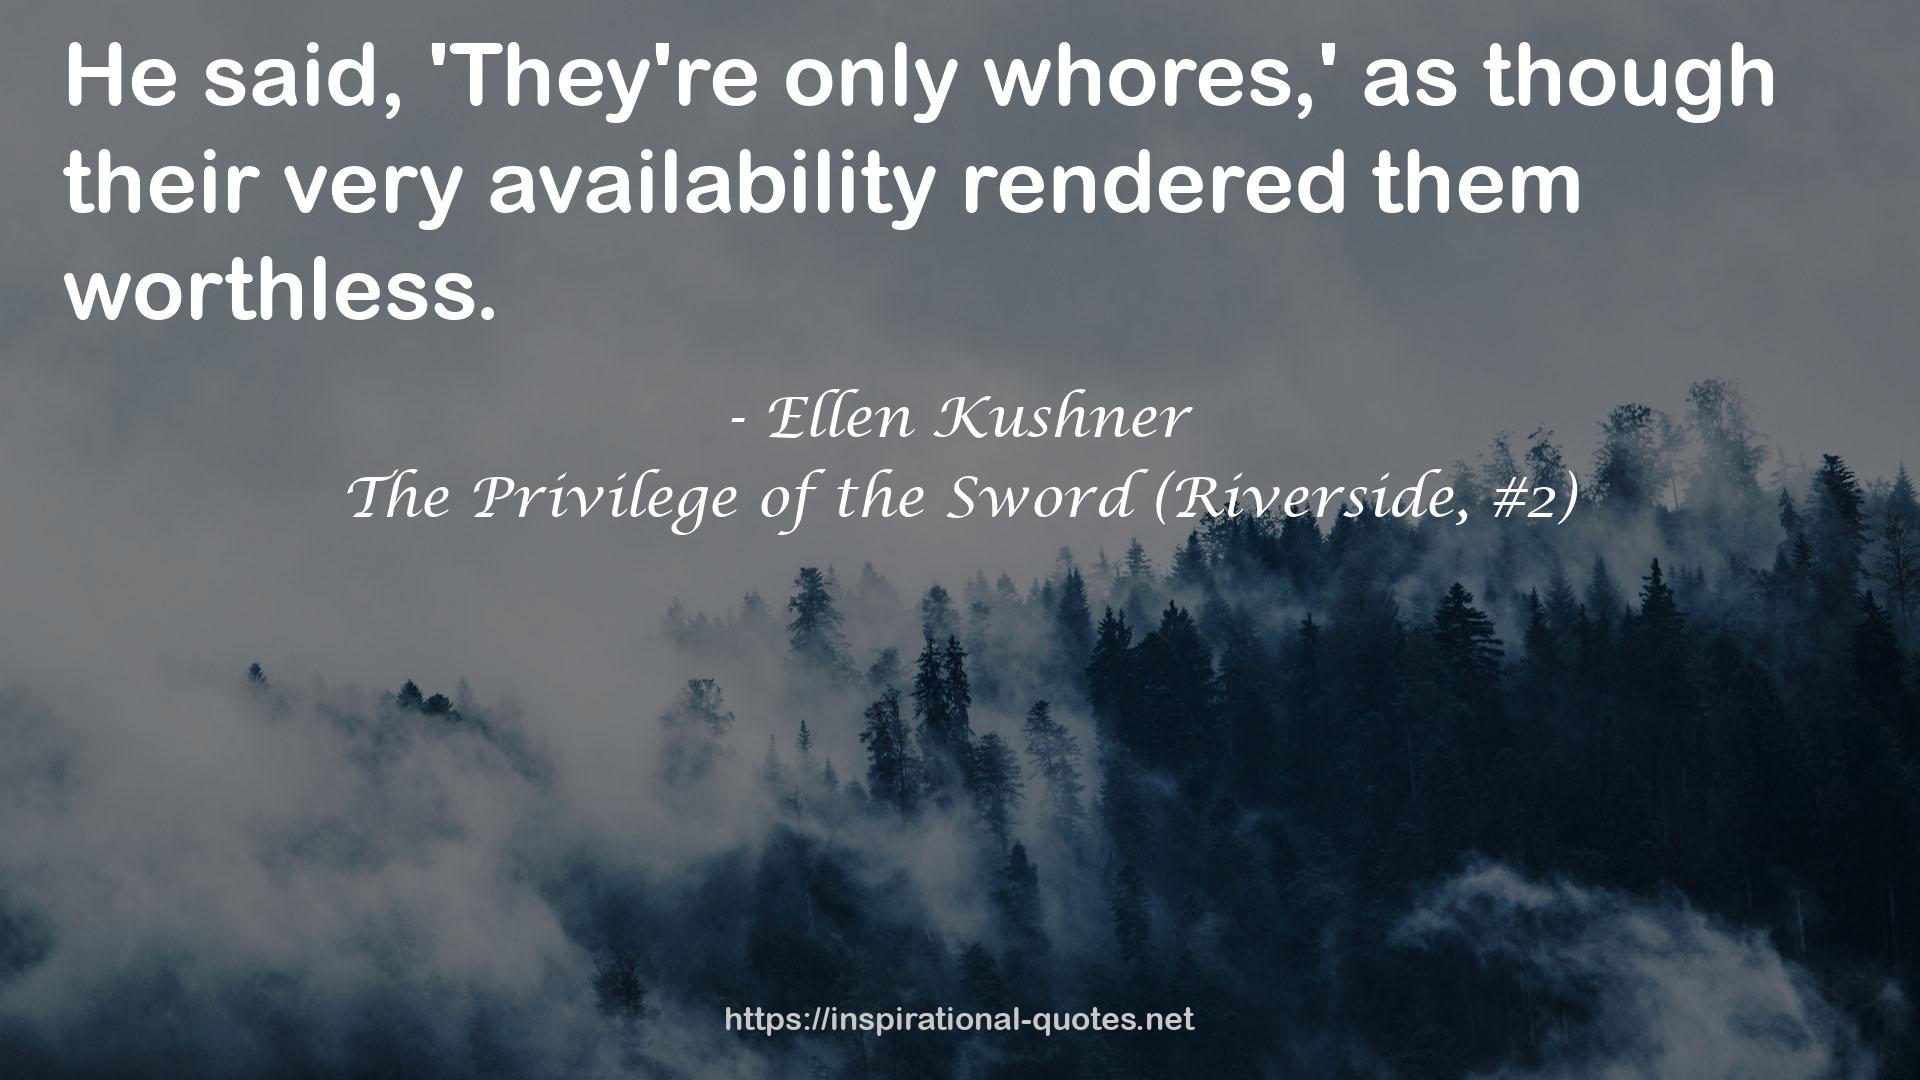 The Privilege of the Sword (Riverside, #2) QUOTES